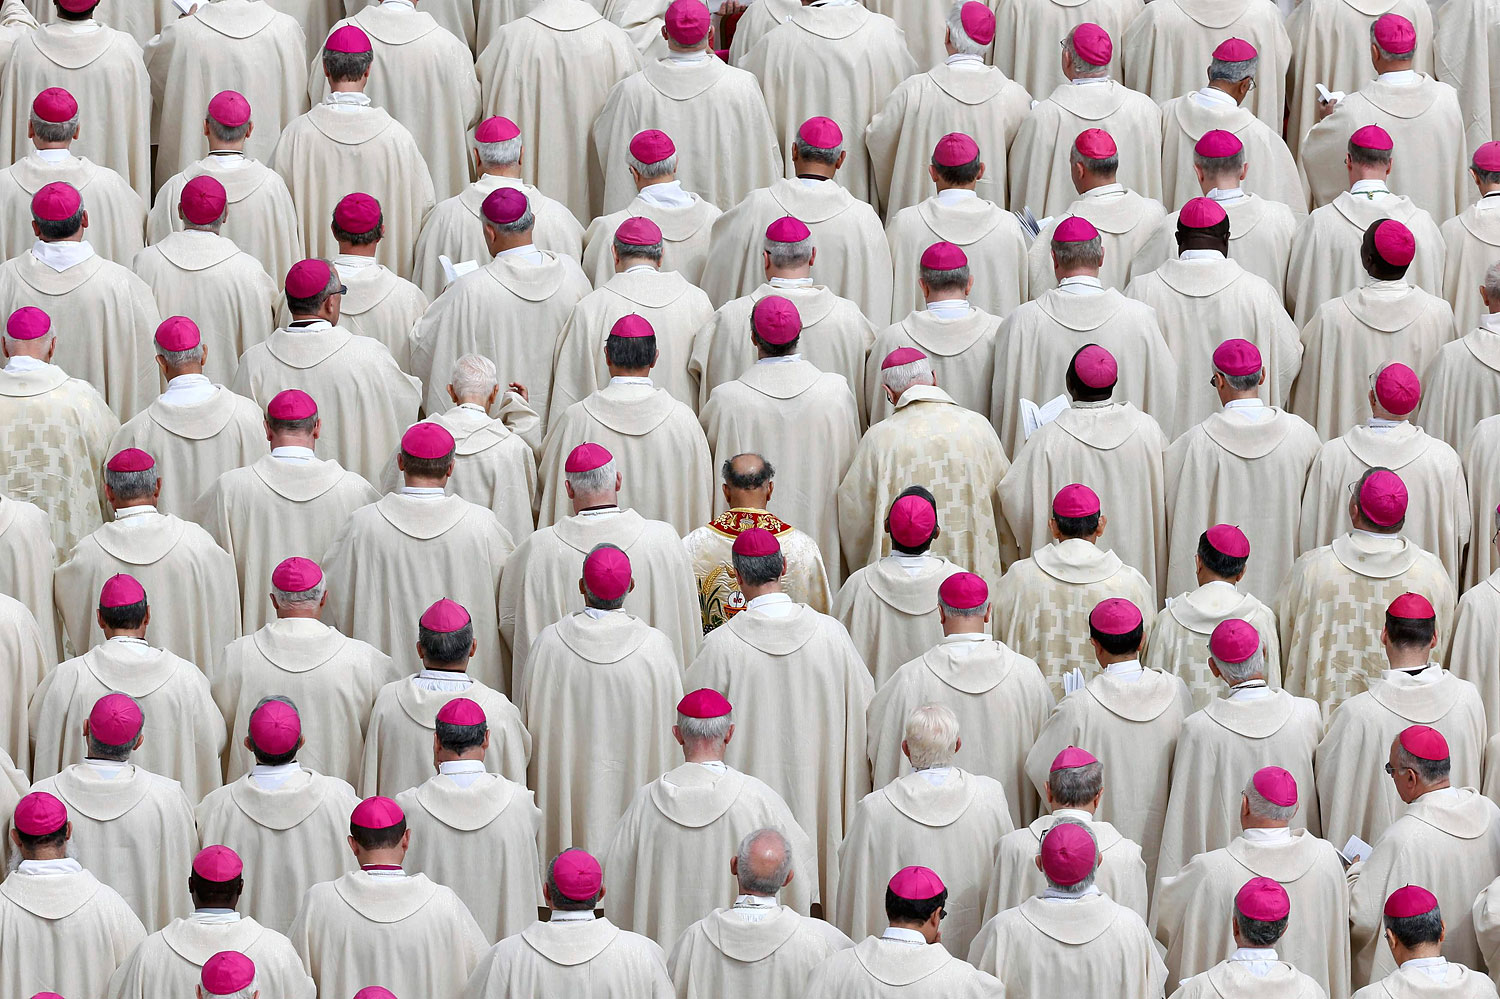 Bishops attend a canonisation mass in St. Peter's Square at the Vatican